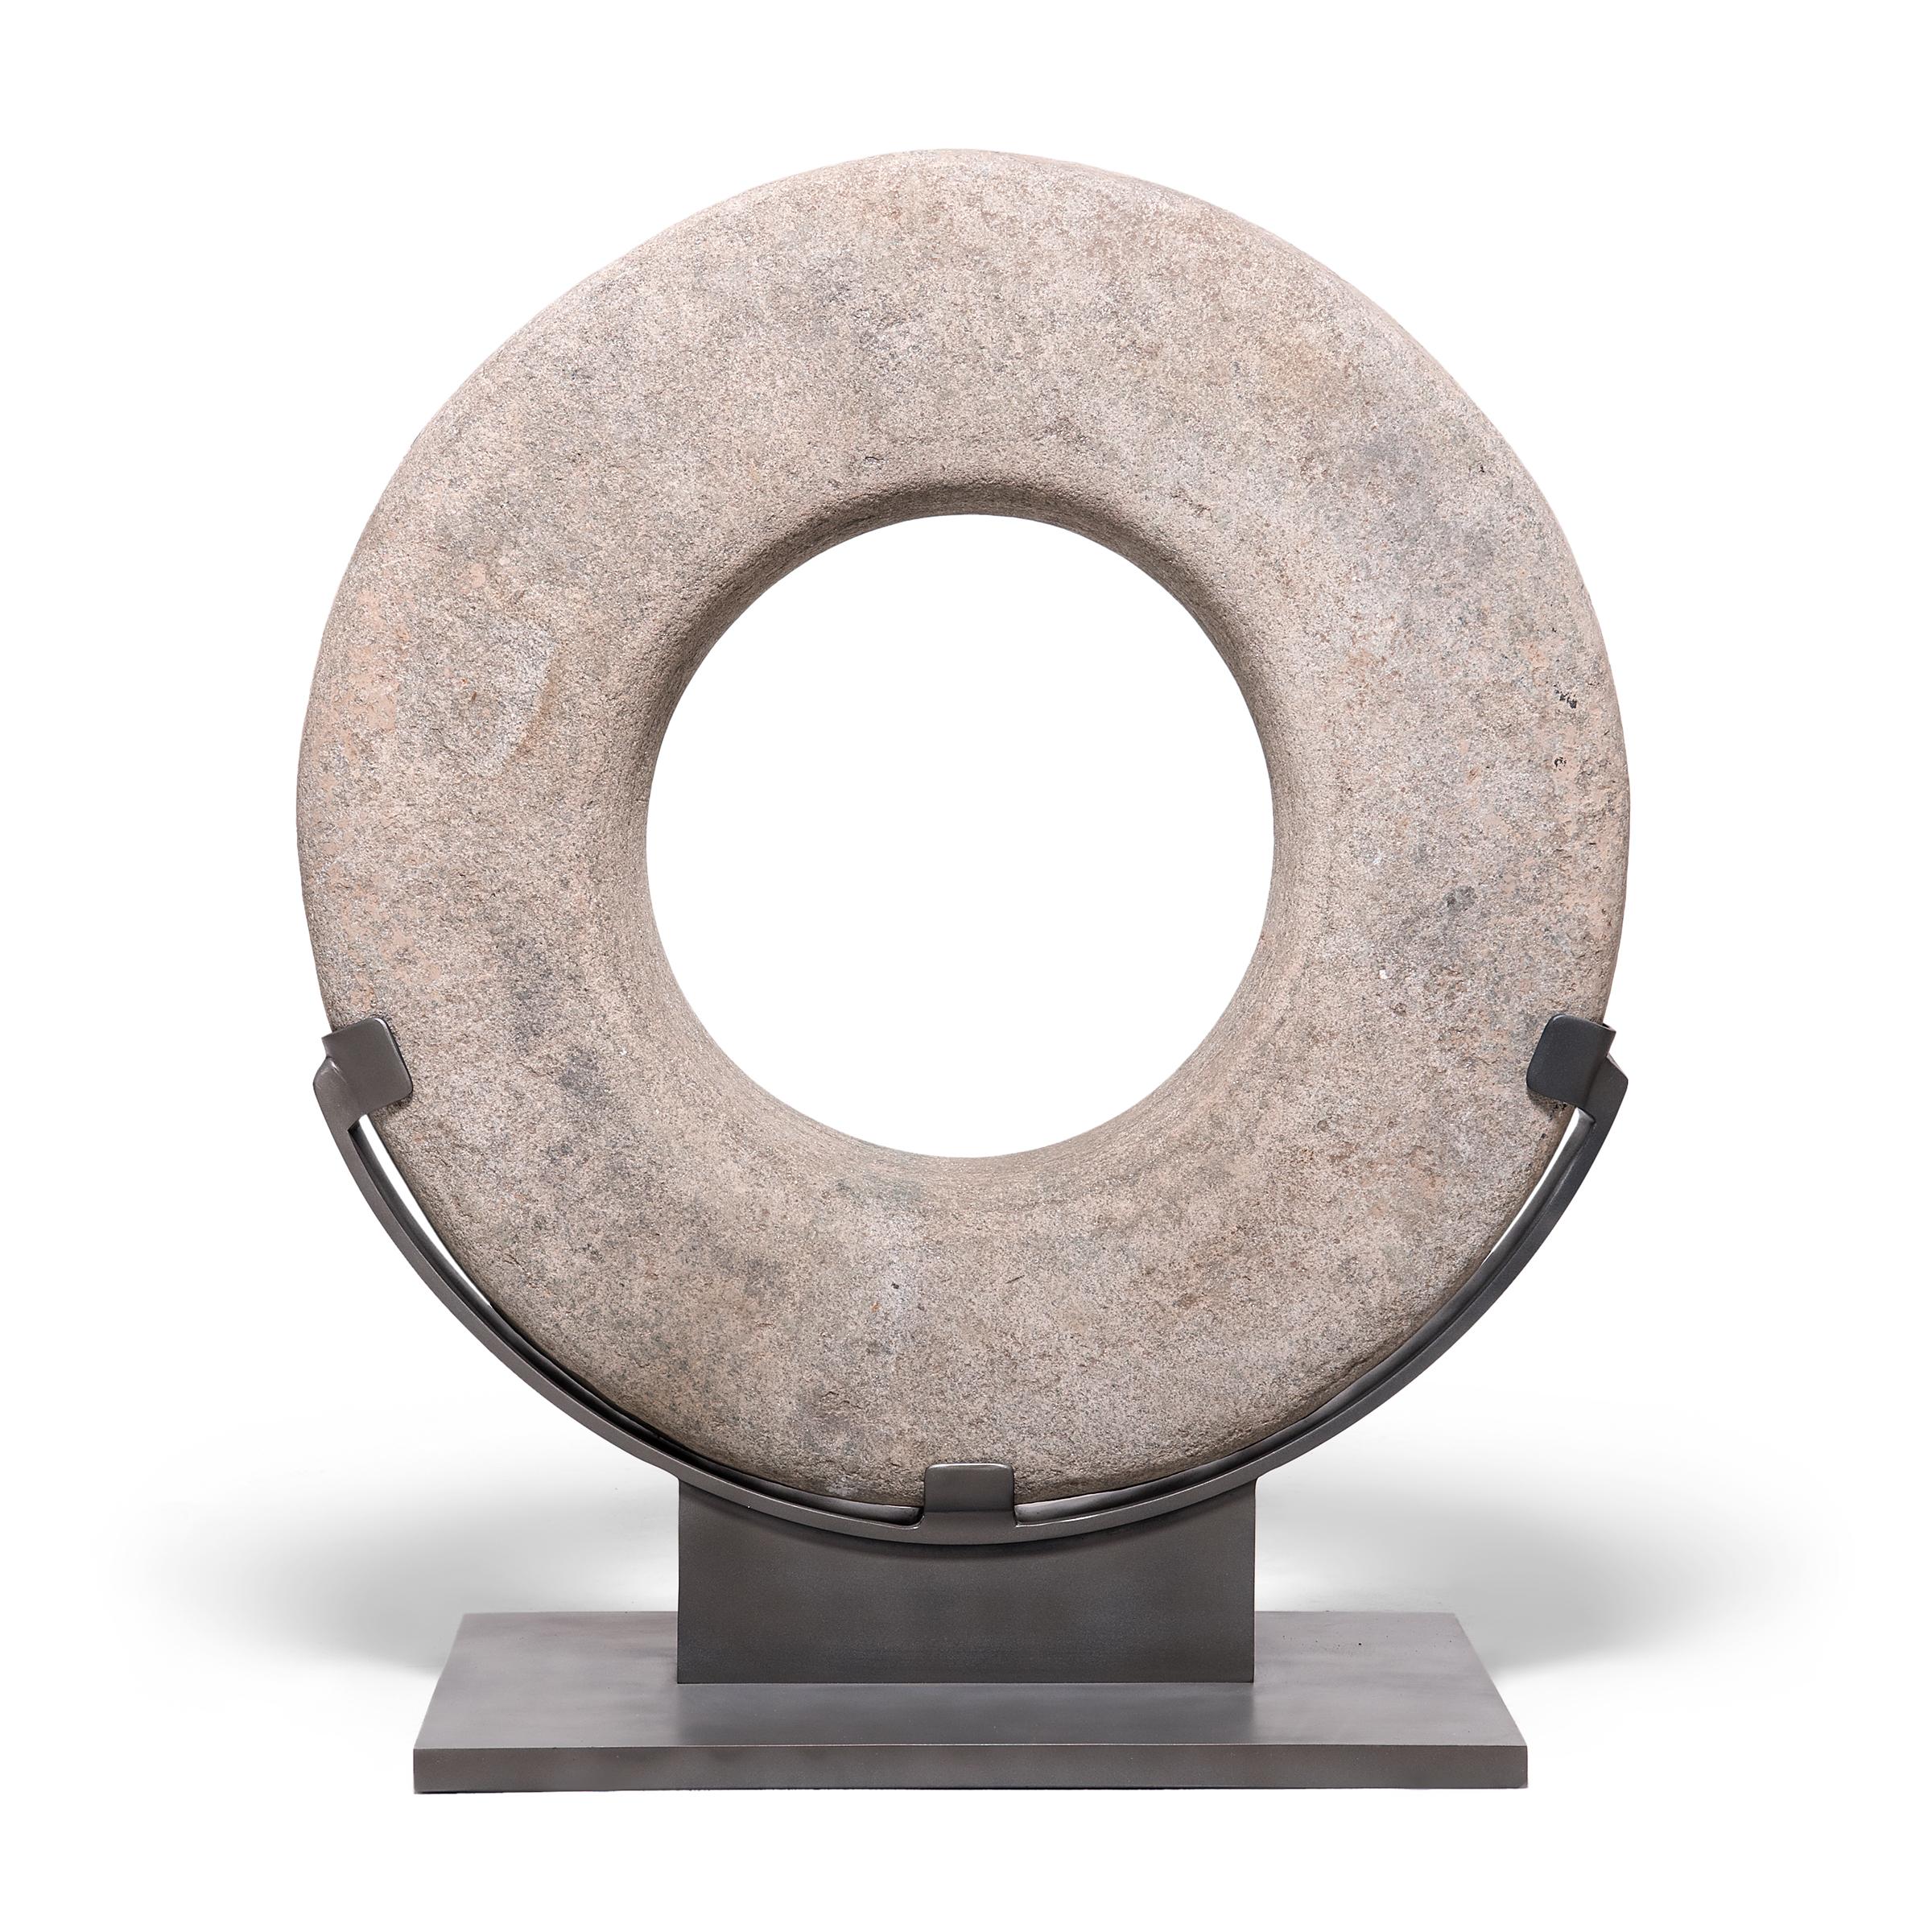 Graphic yet minimal, this elegant stone garden sculpture is actually a Qing-dynasty well head from China's Hebei province. Hand-carved from a solid block of limestone, the stone ring has a smooth surface texture and neutral, mottled coloring. One of